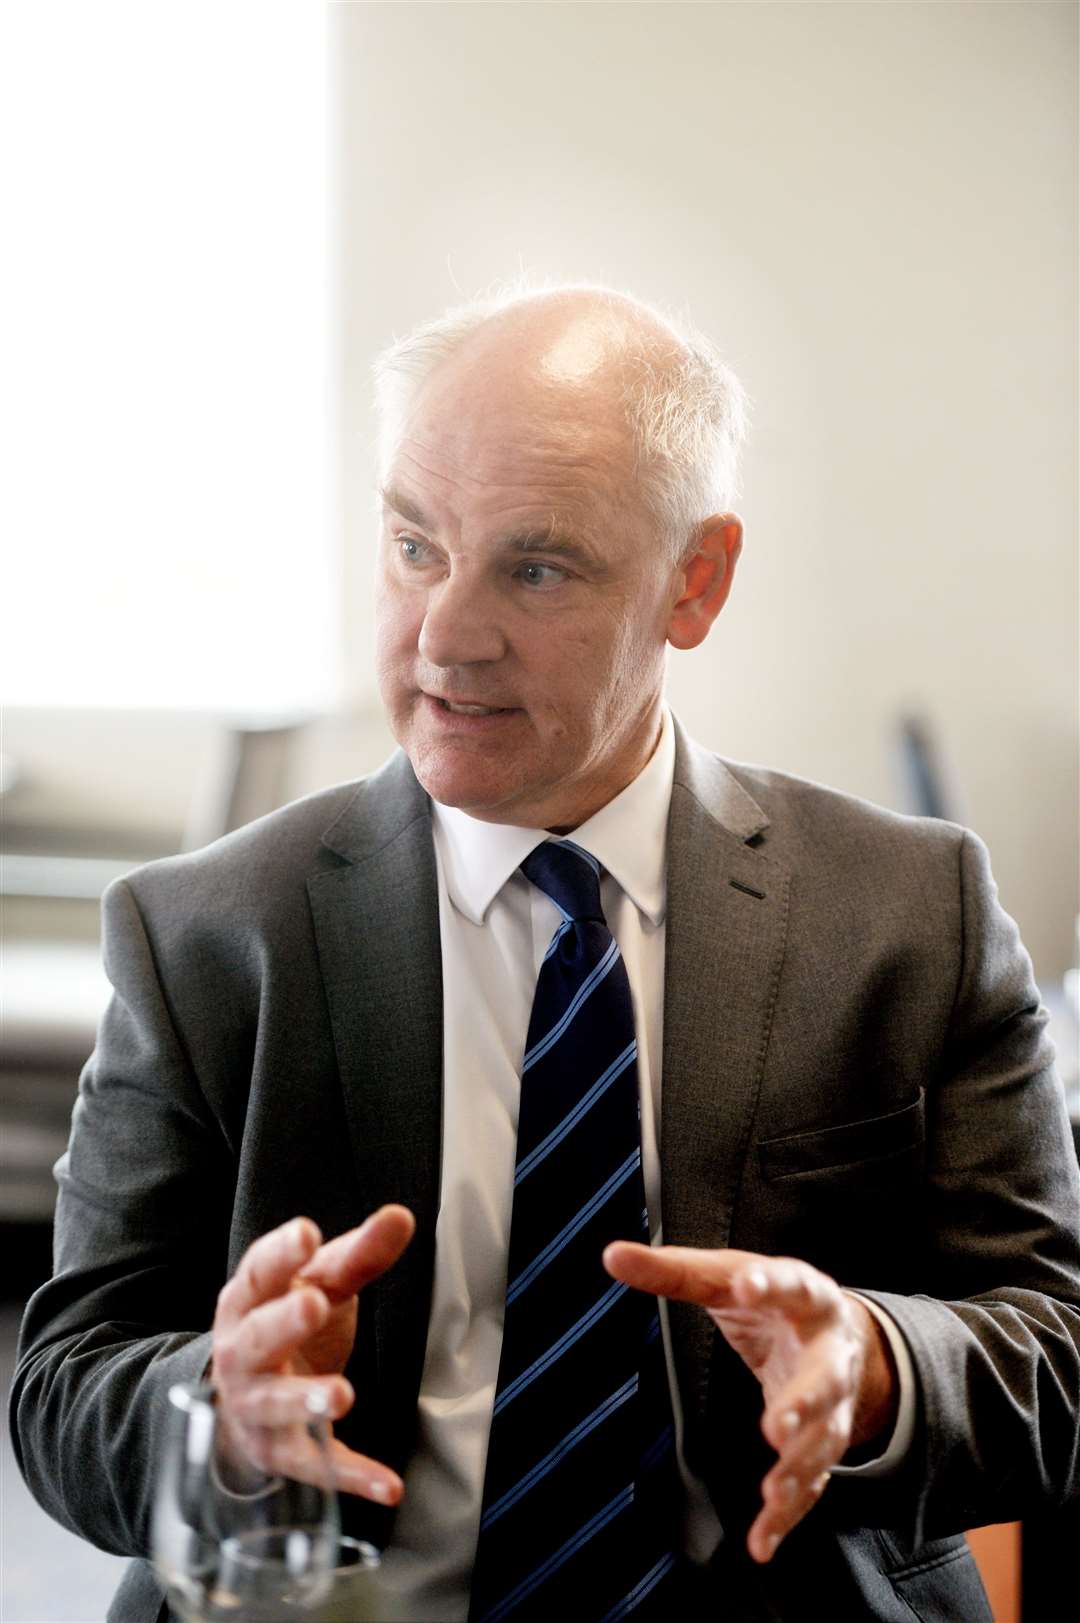 Businesses want a chance to get back to normal, says David Richardson.